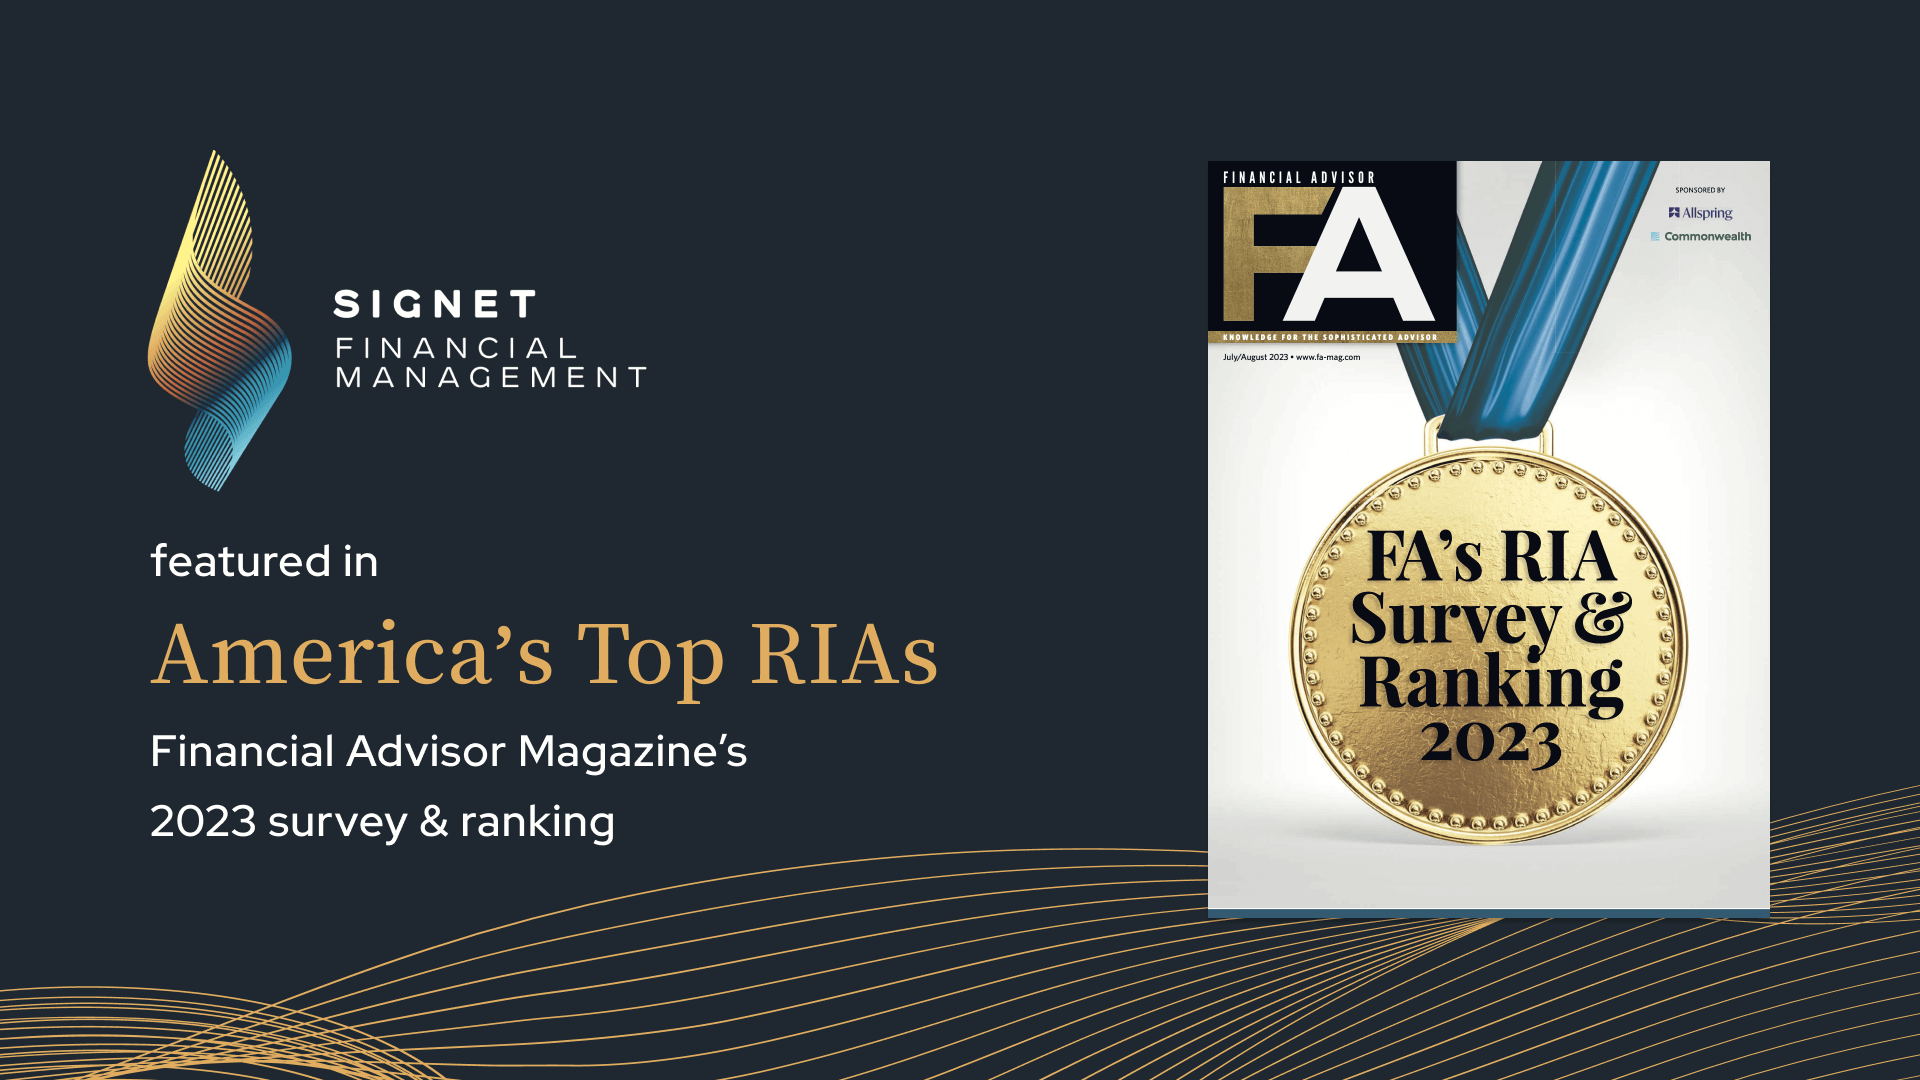 Signet Financial Management ranked among America's top RIAs for 2023